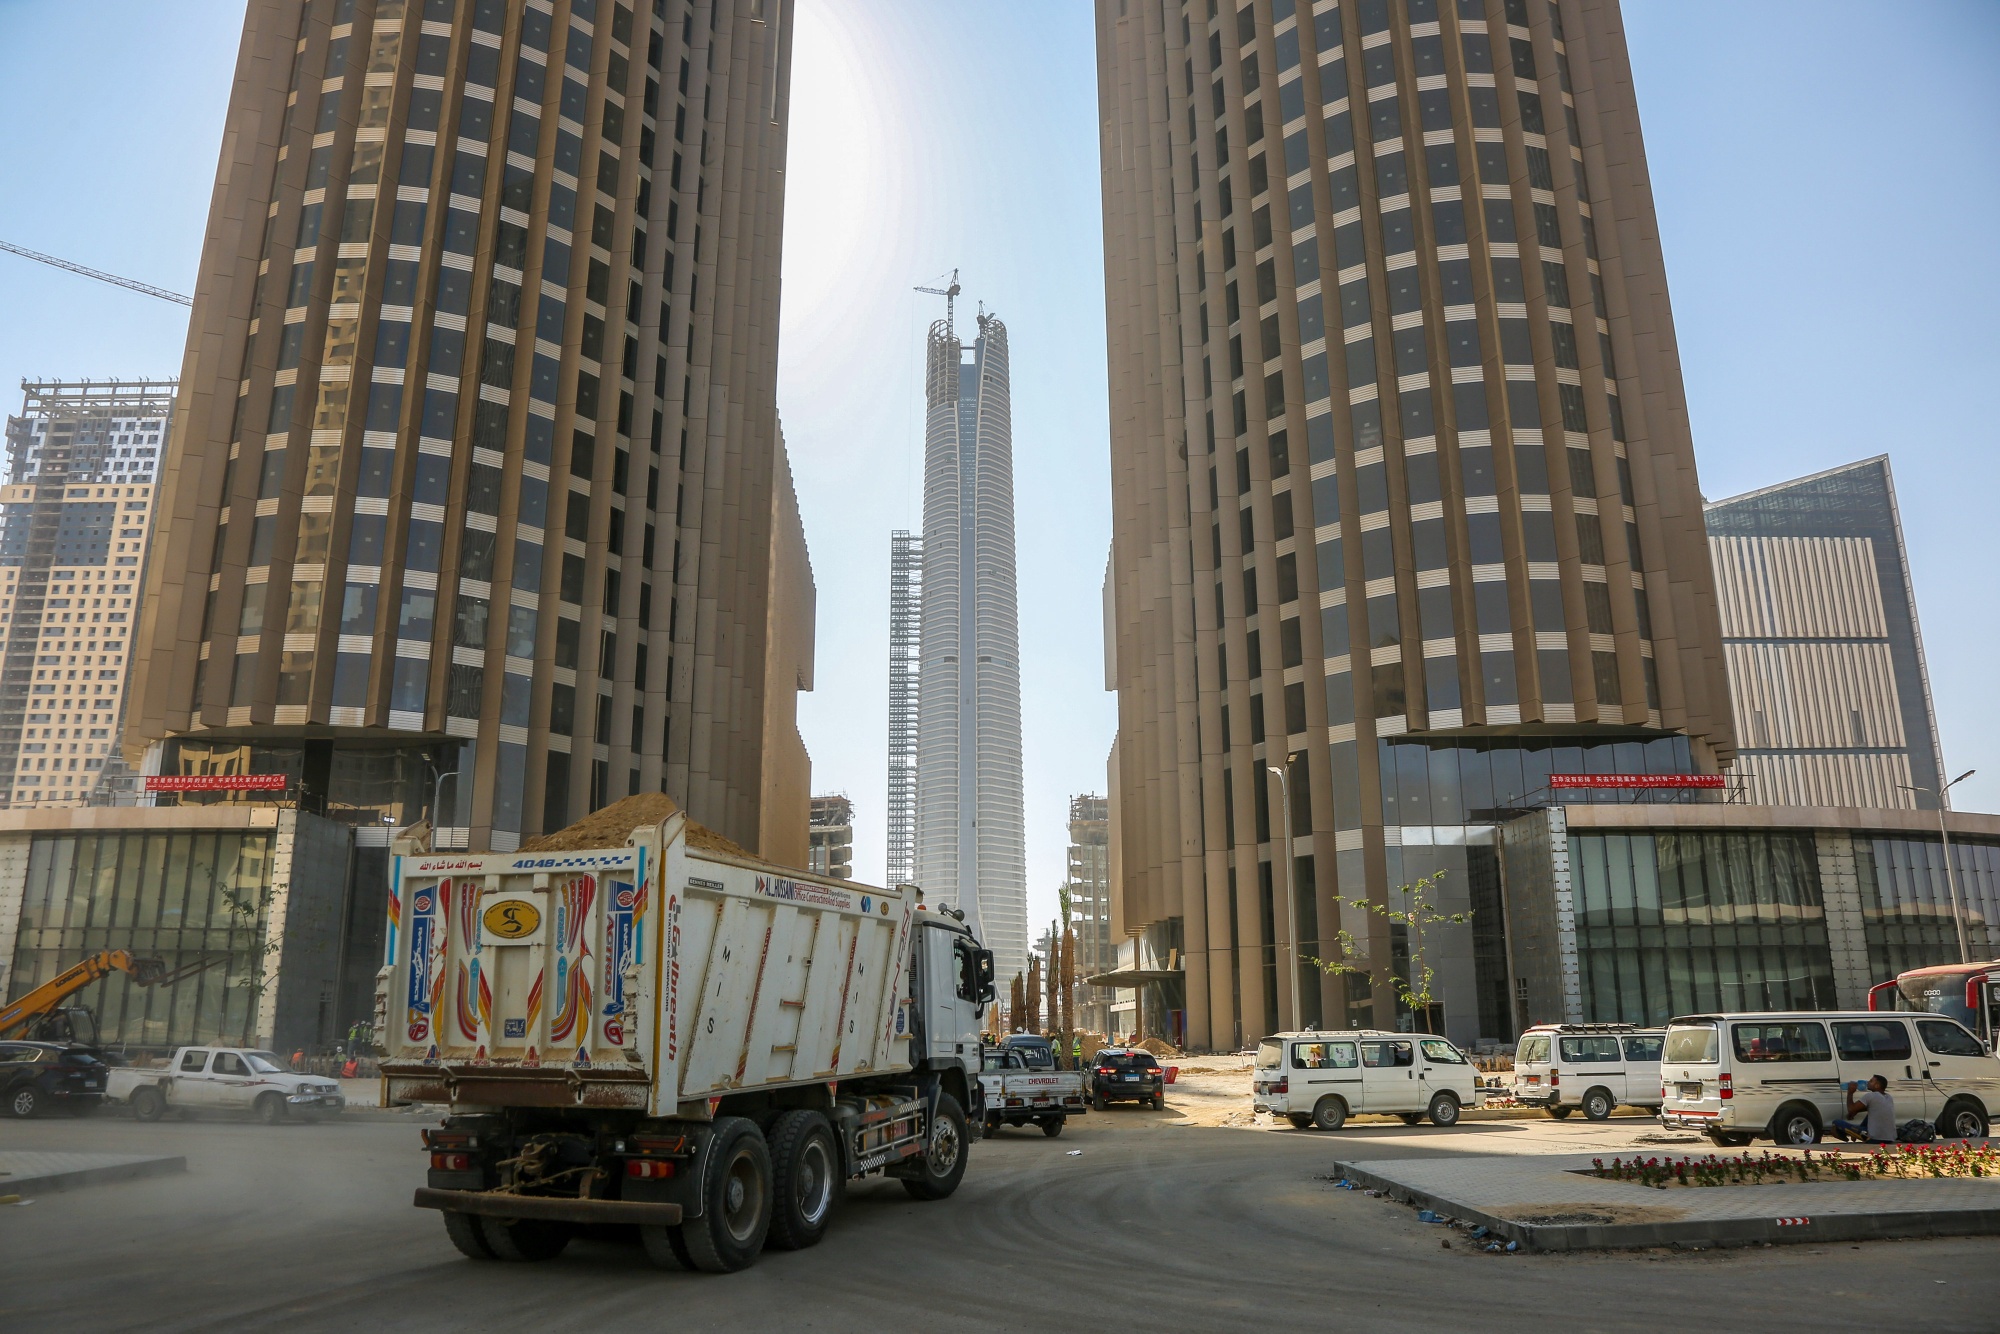 A dump truck transports construction materials in the central business district&nbsp;of Egypt's New Administrative Capital, east of Cairo in Egypt.